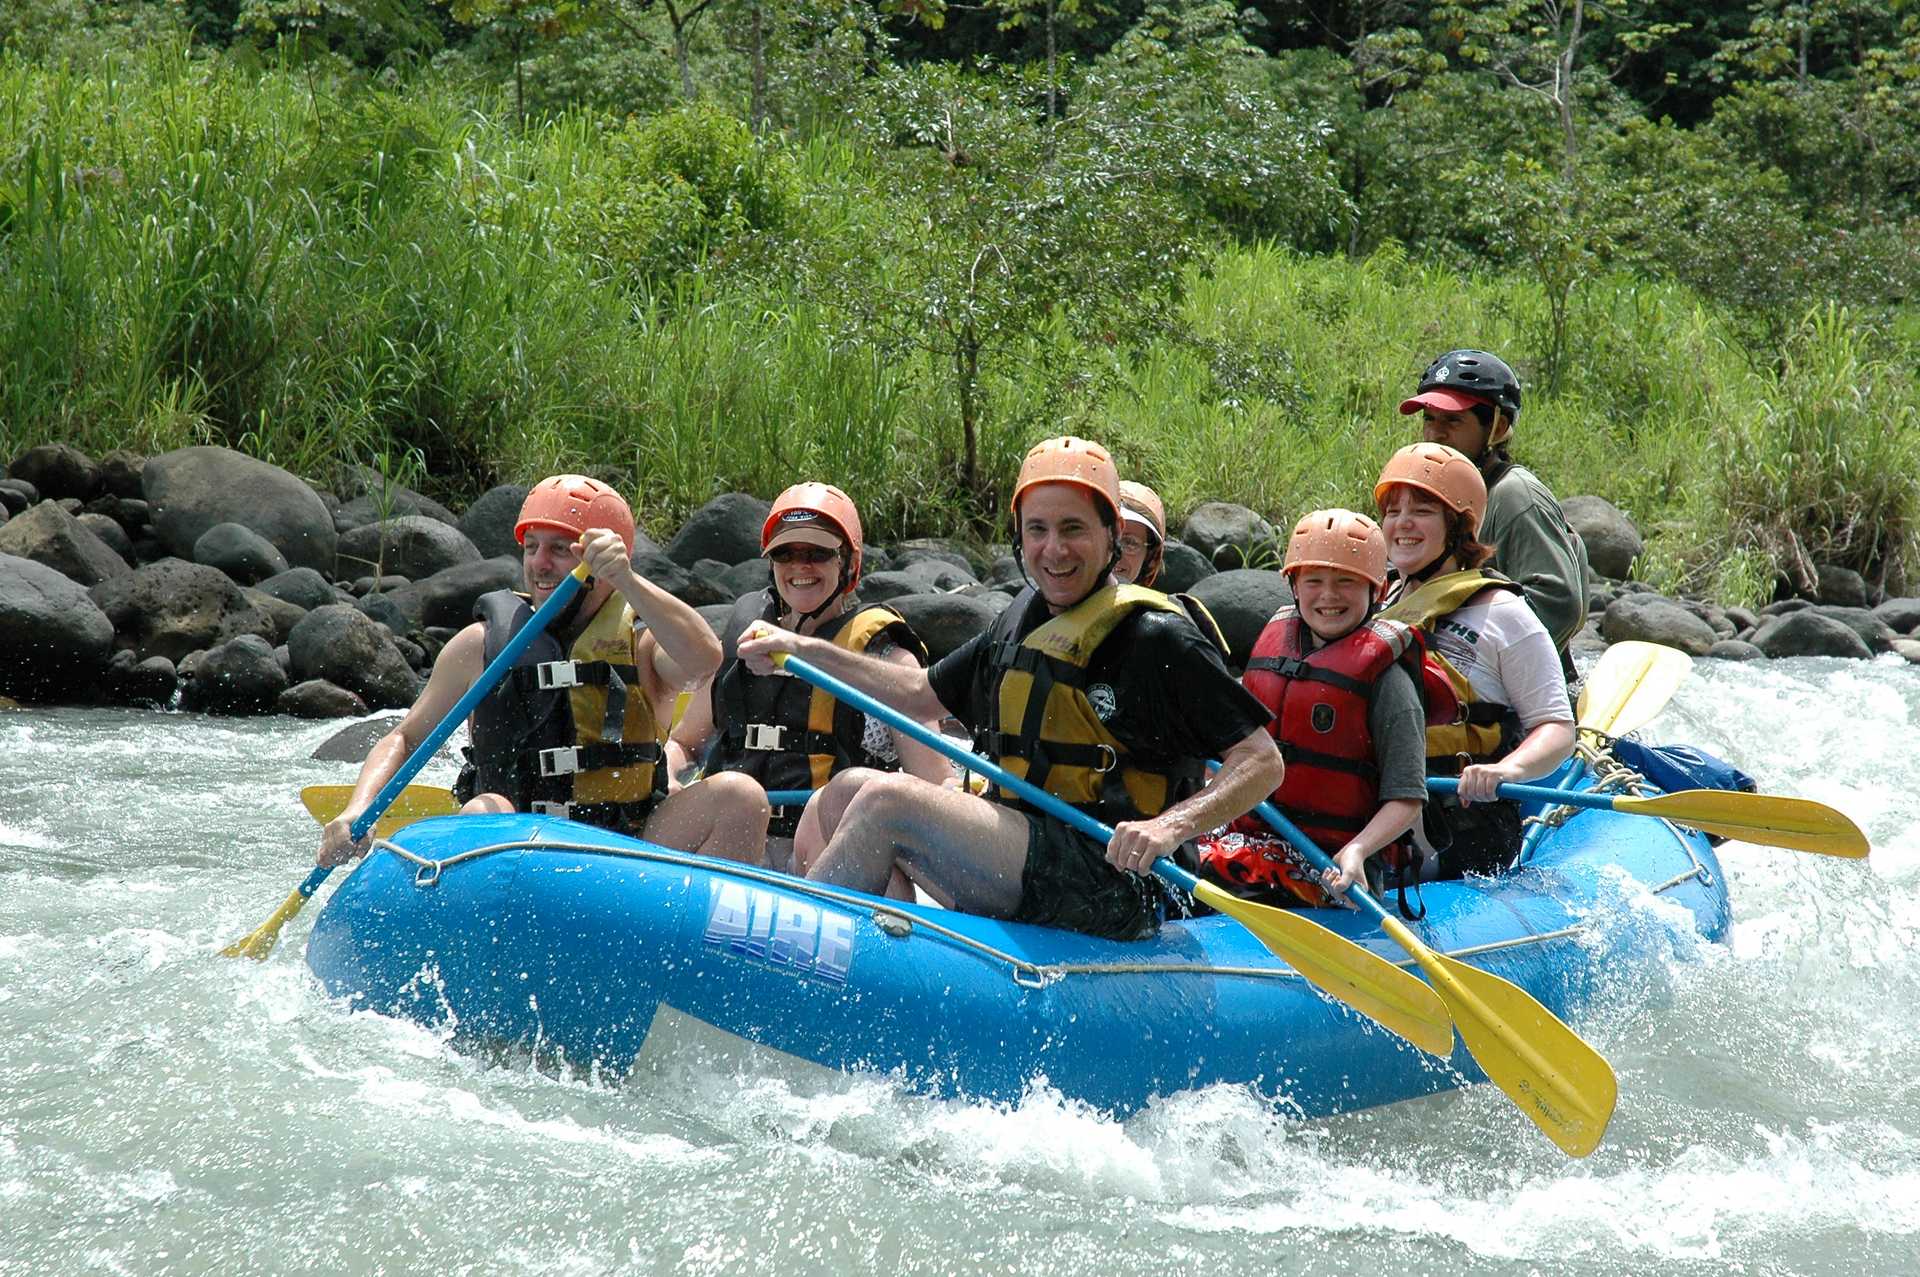 A family rafting on a river